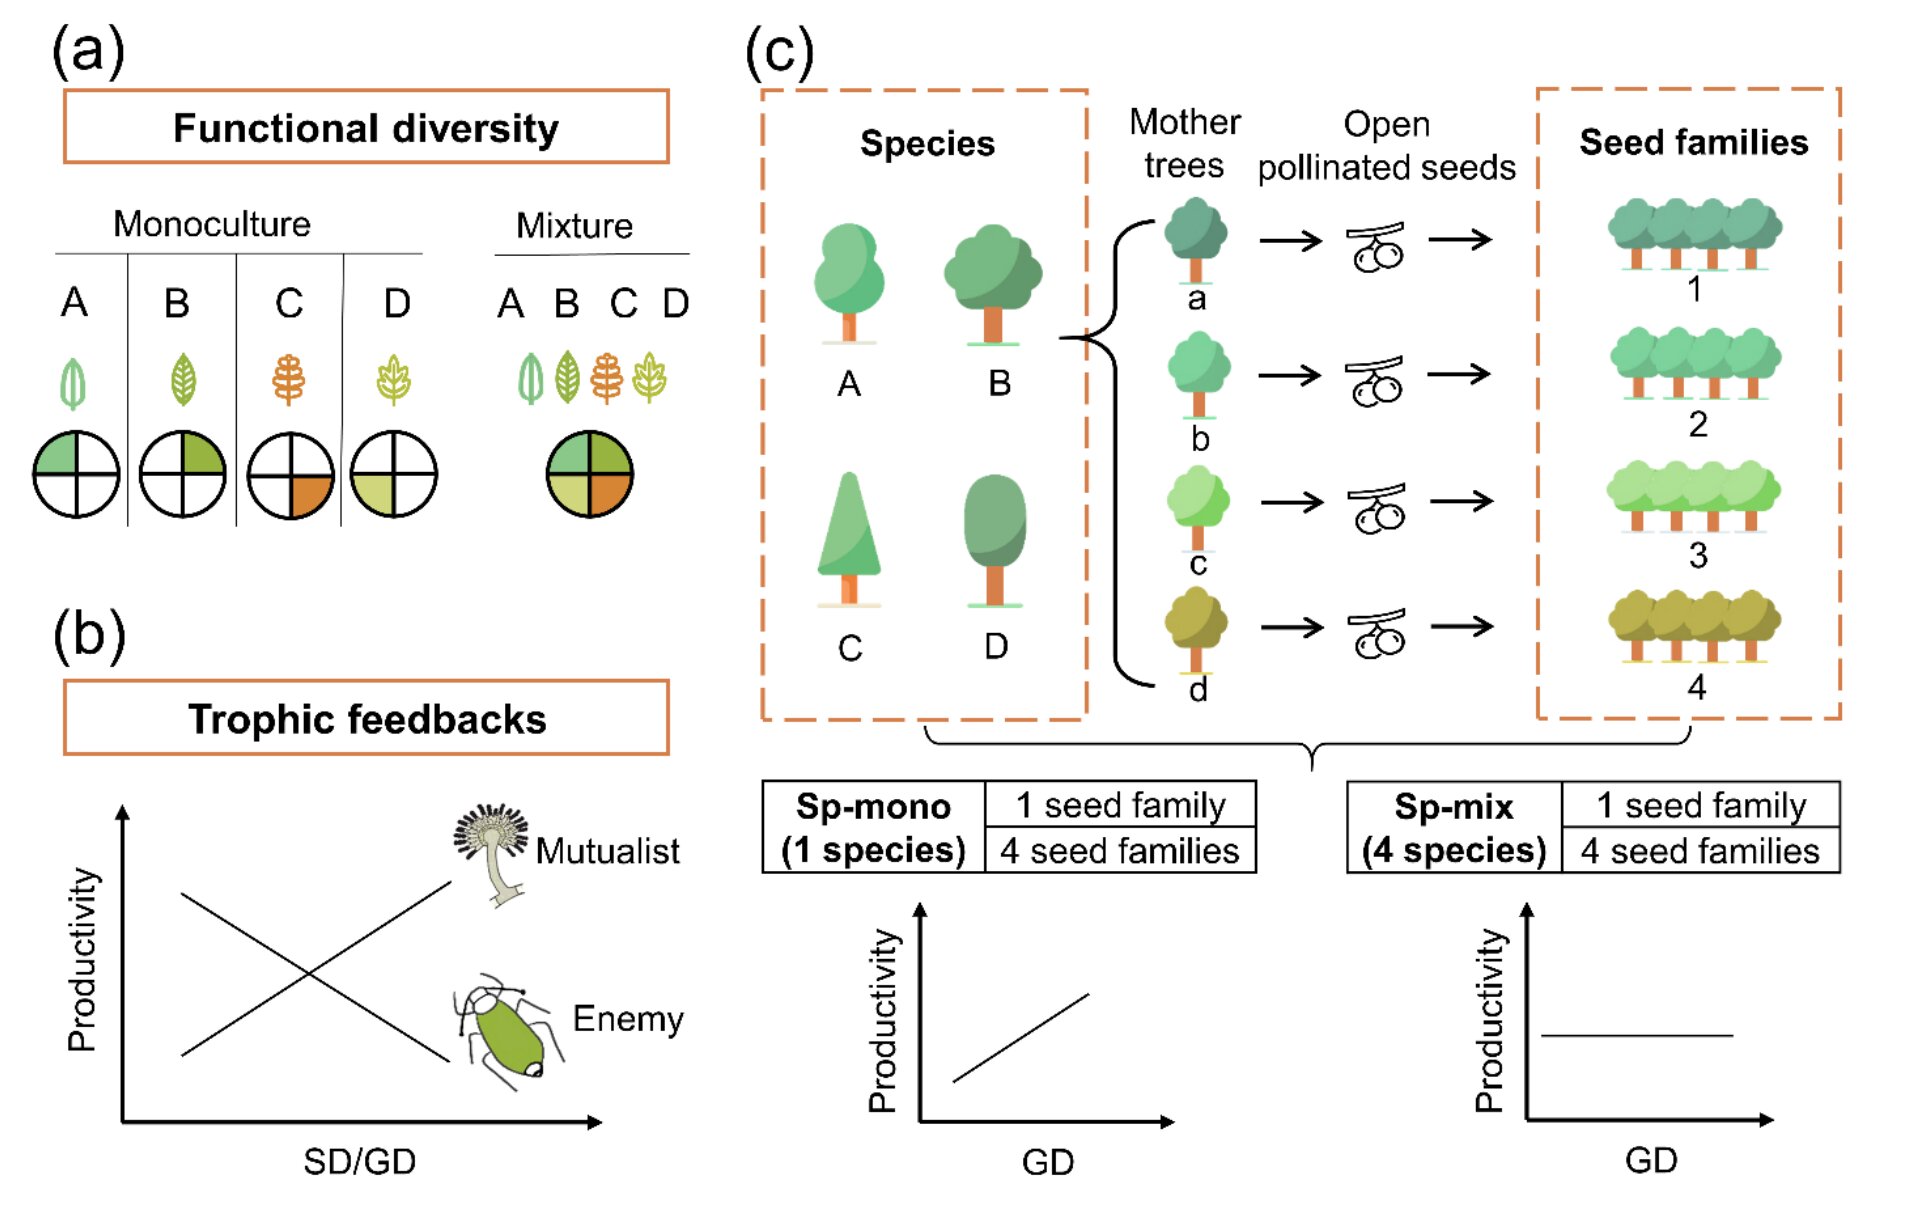 Forests found to benefit from tree species variety and genetic diversity